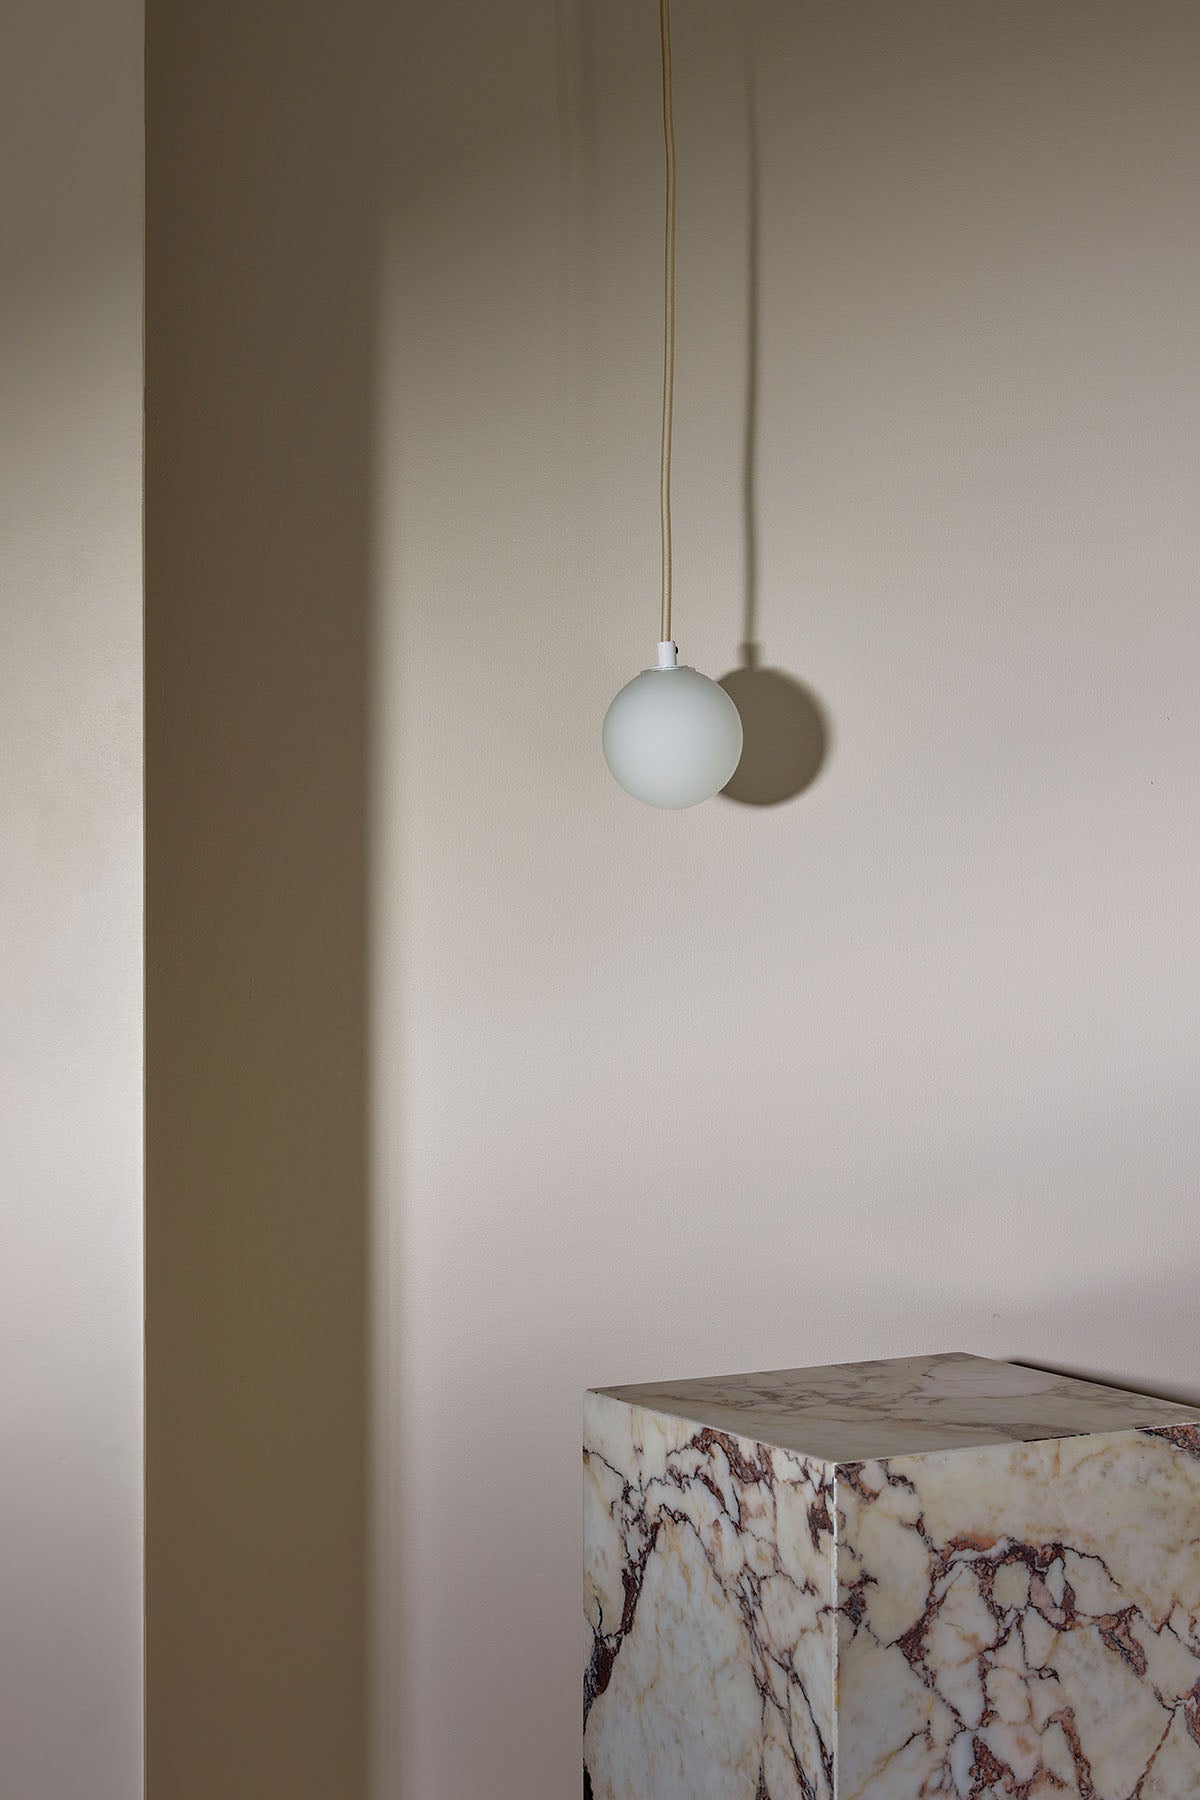 Orb Small Pendant, Solid Rod in White Satin and White Frosted. Image by Lawrence Furzey